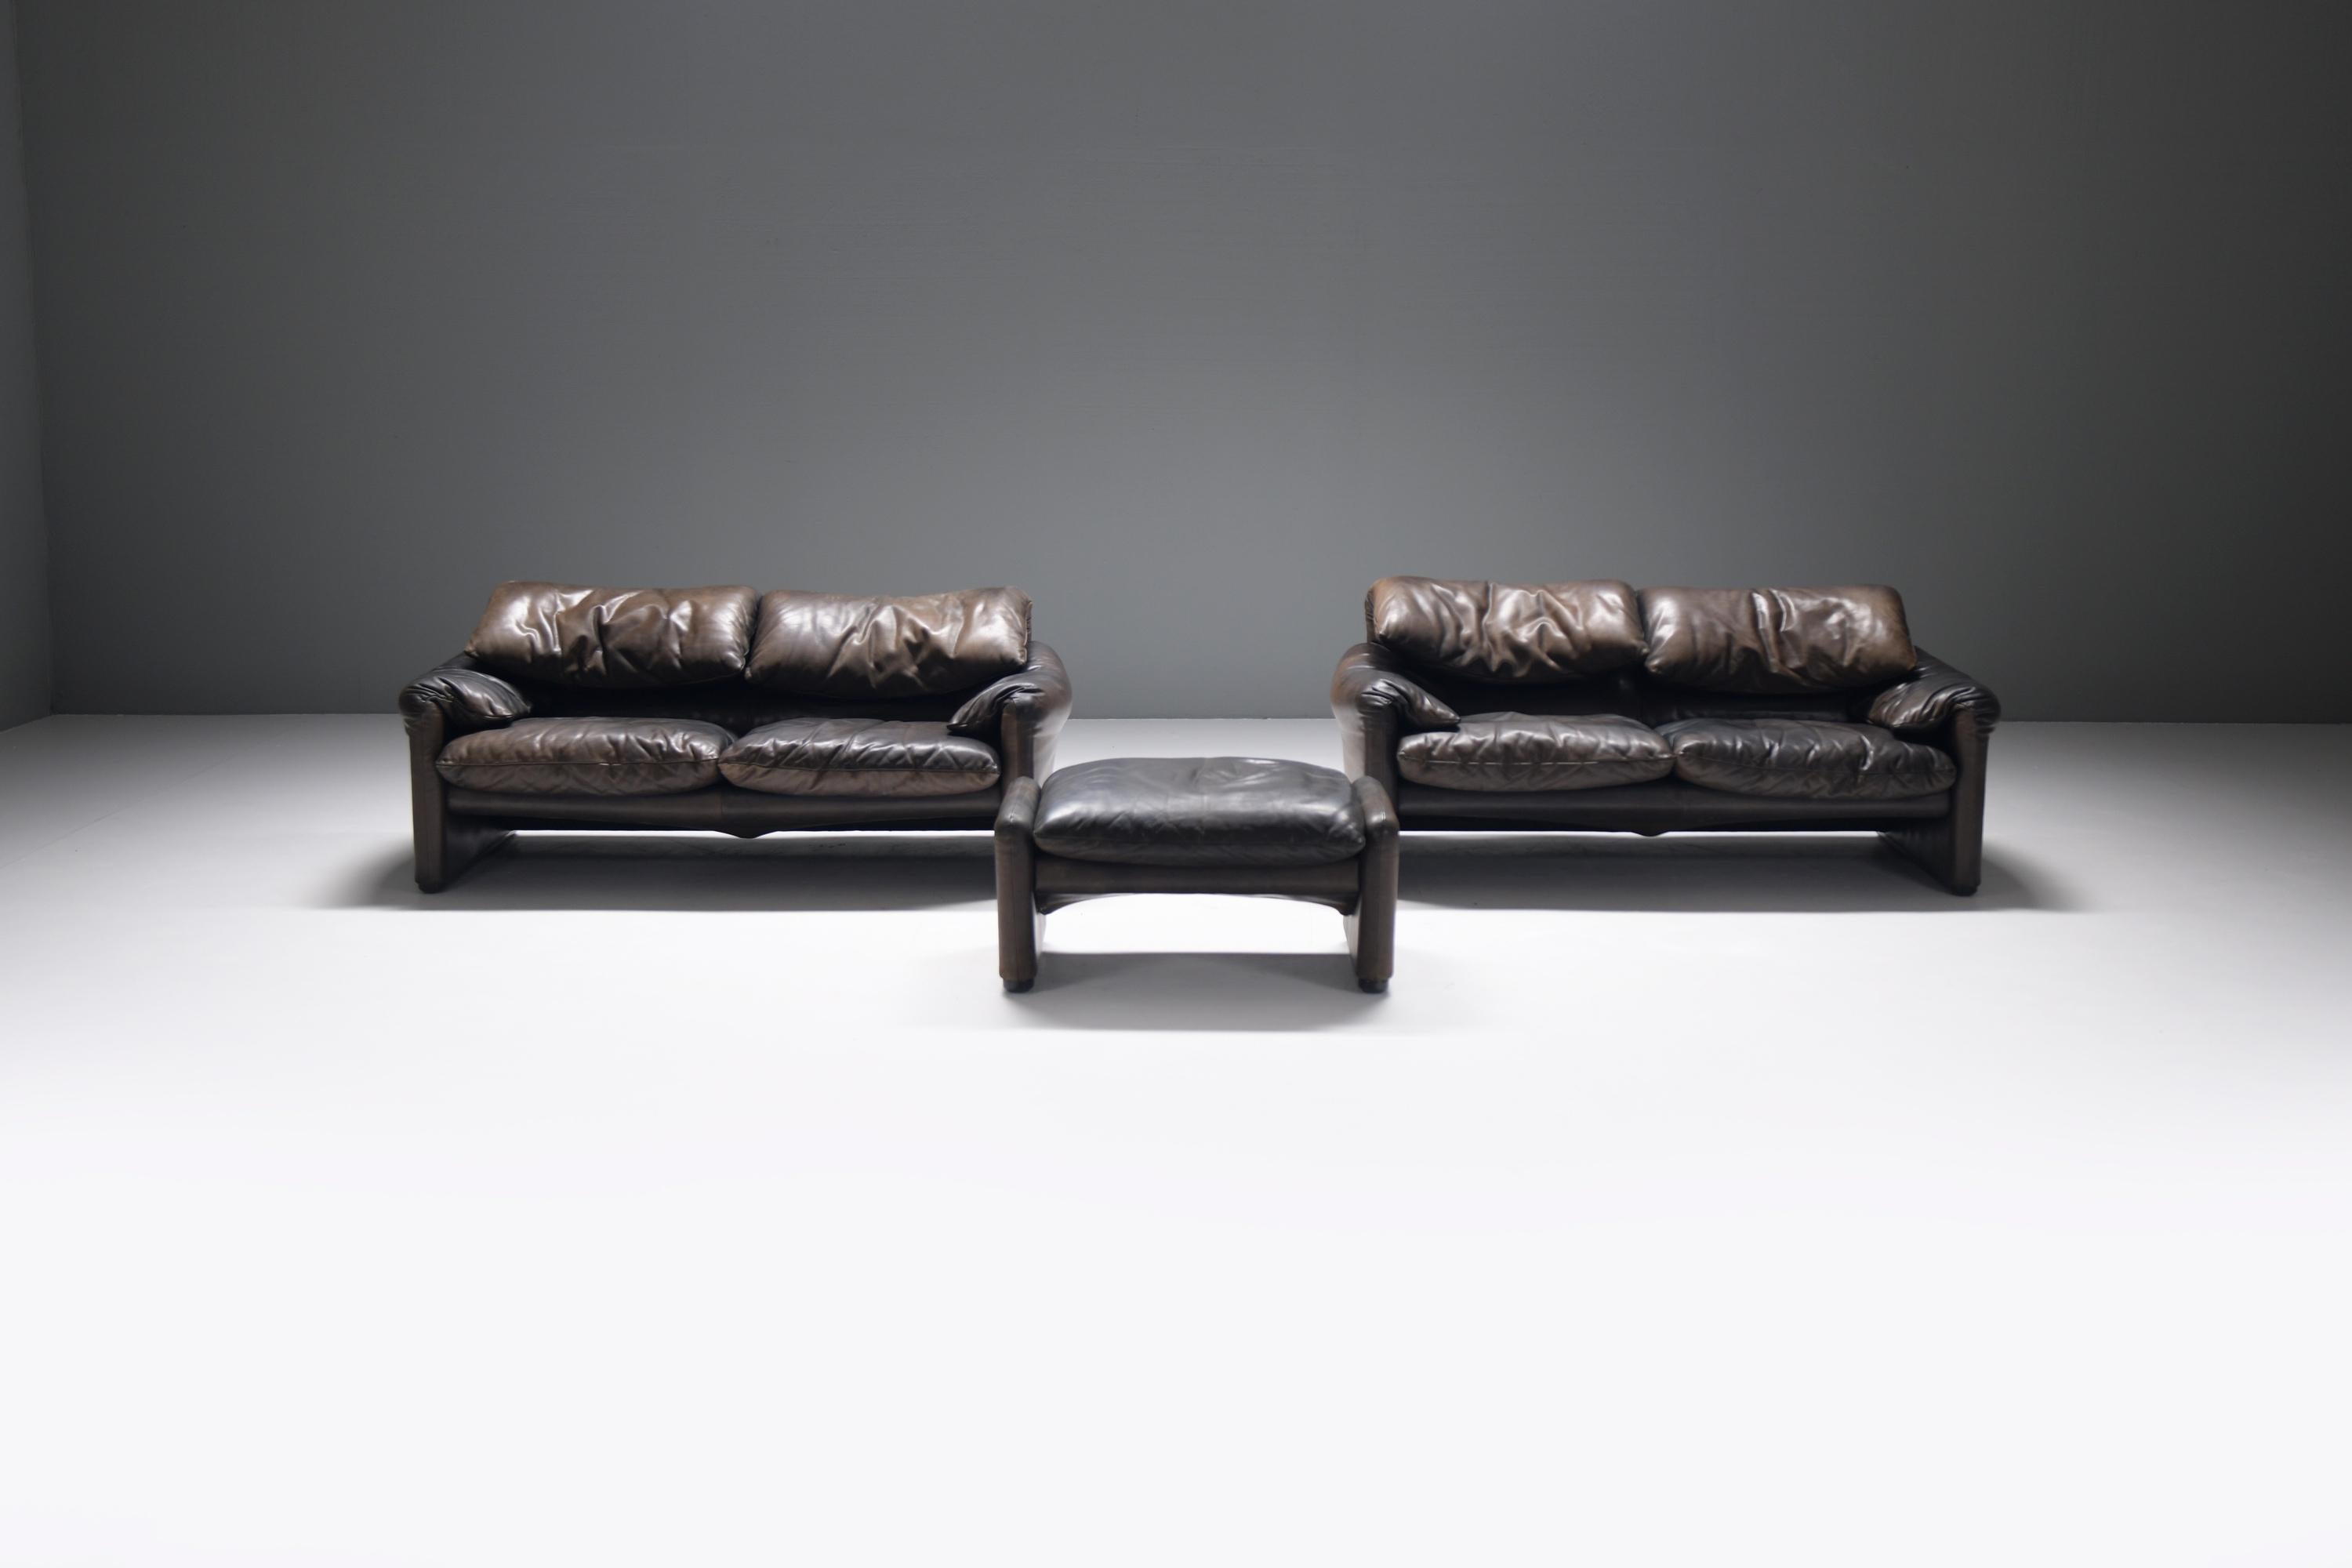 Leather Rich patinated Maralunga set by Vico Magistretti for Cassina Italy